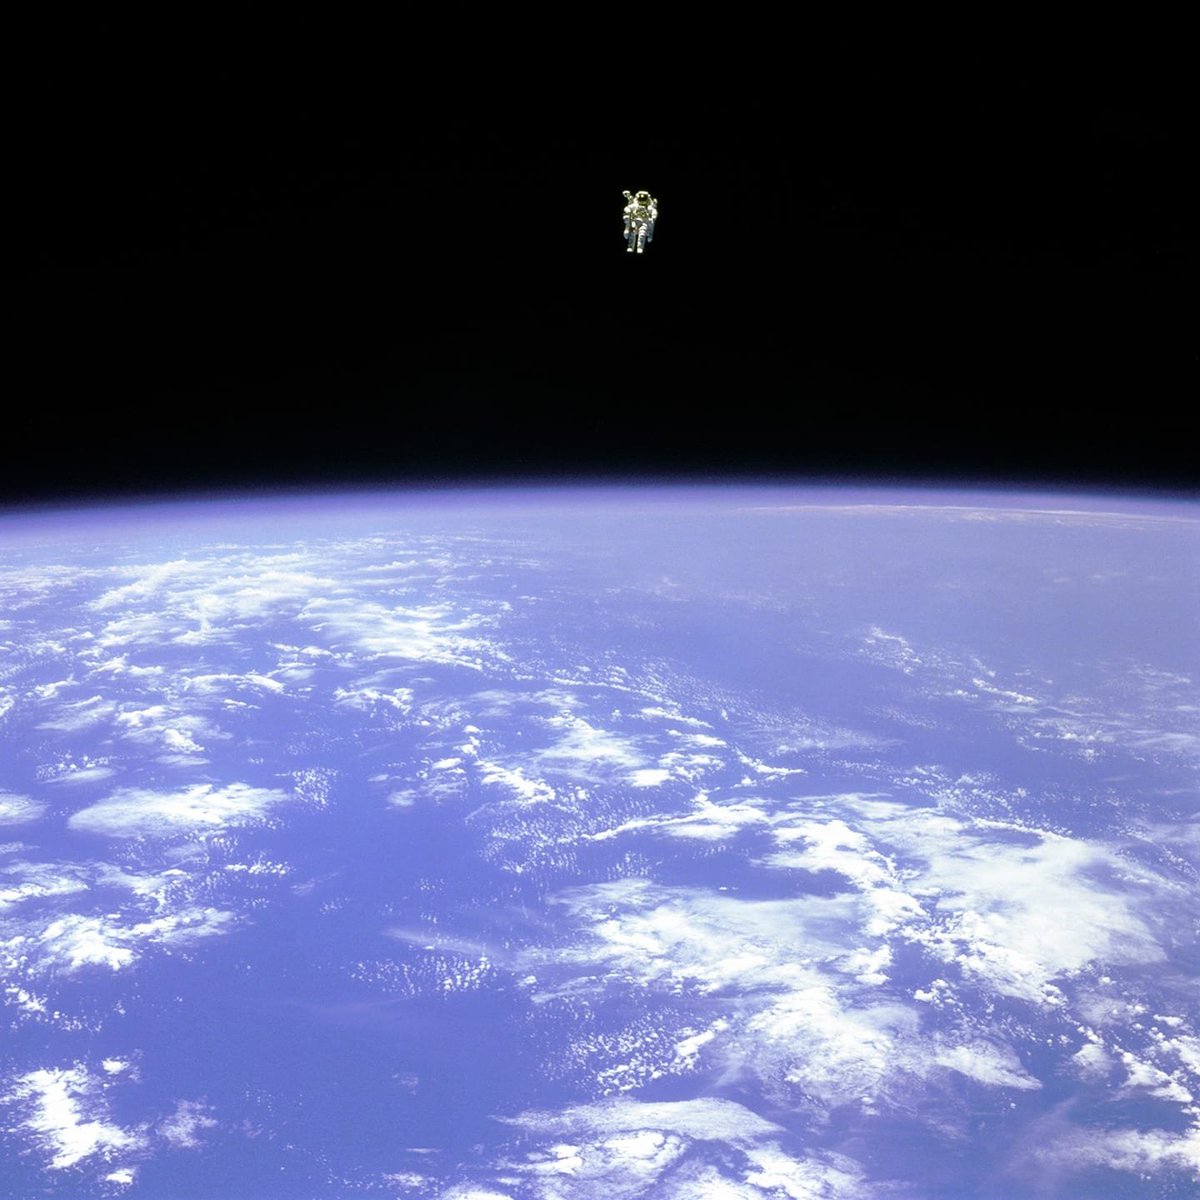 This photo is 100% real.​​
Taken all the way back in 1984, it shows Bruce McCandless II, a mission specialist on the Challenger spacecraft as he reached a maximum distance on one of the first untethered spacewalks ever.​
Image: NASA